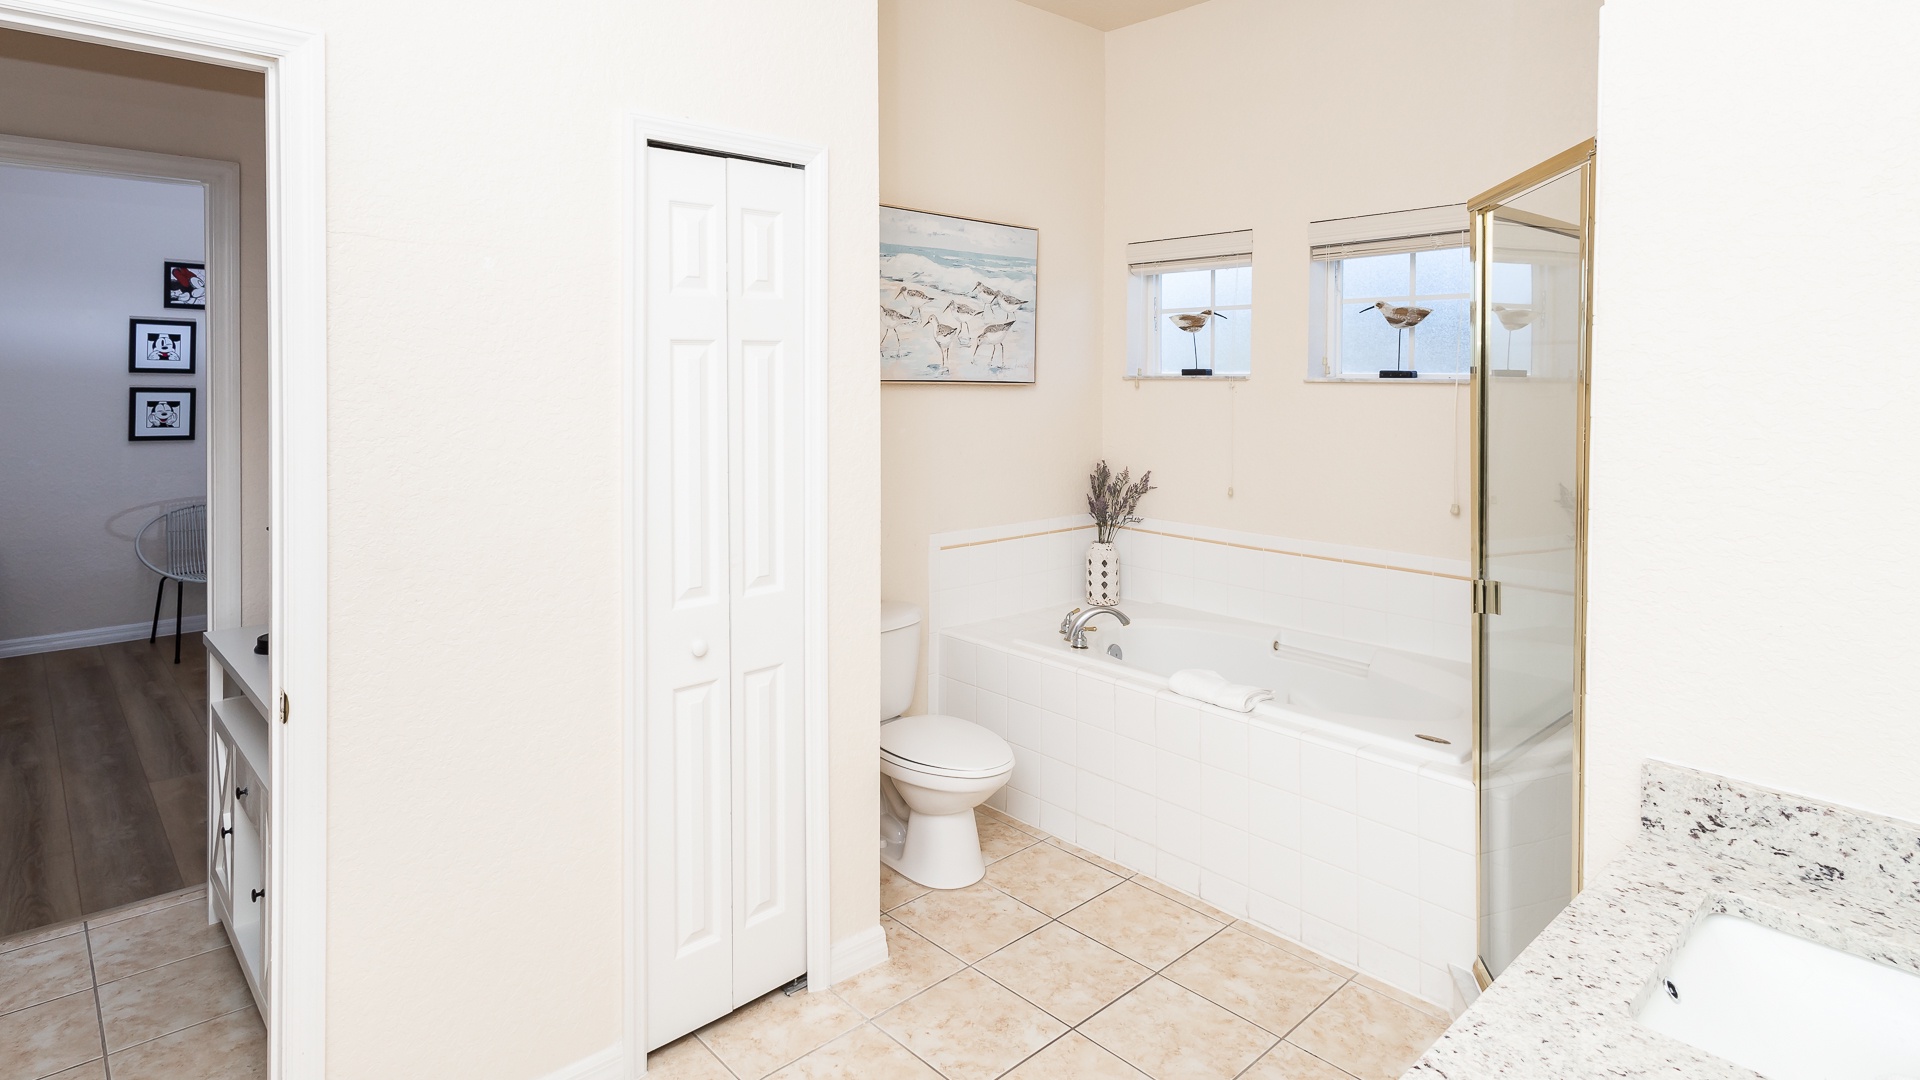 A double vanity, glass shower, & soaking tub await in the second full bath